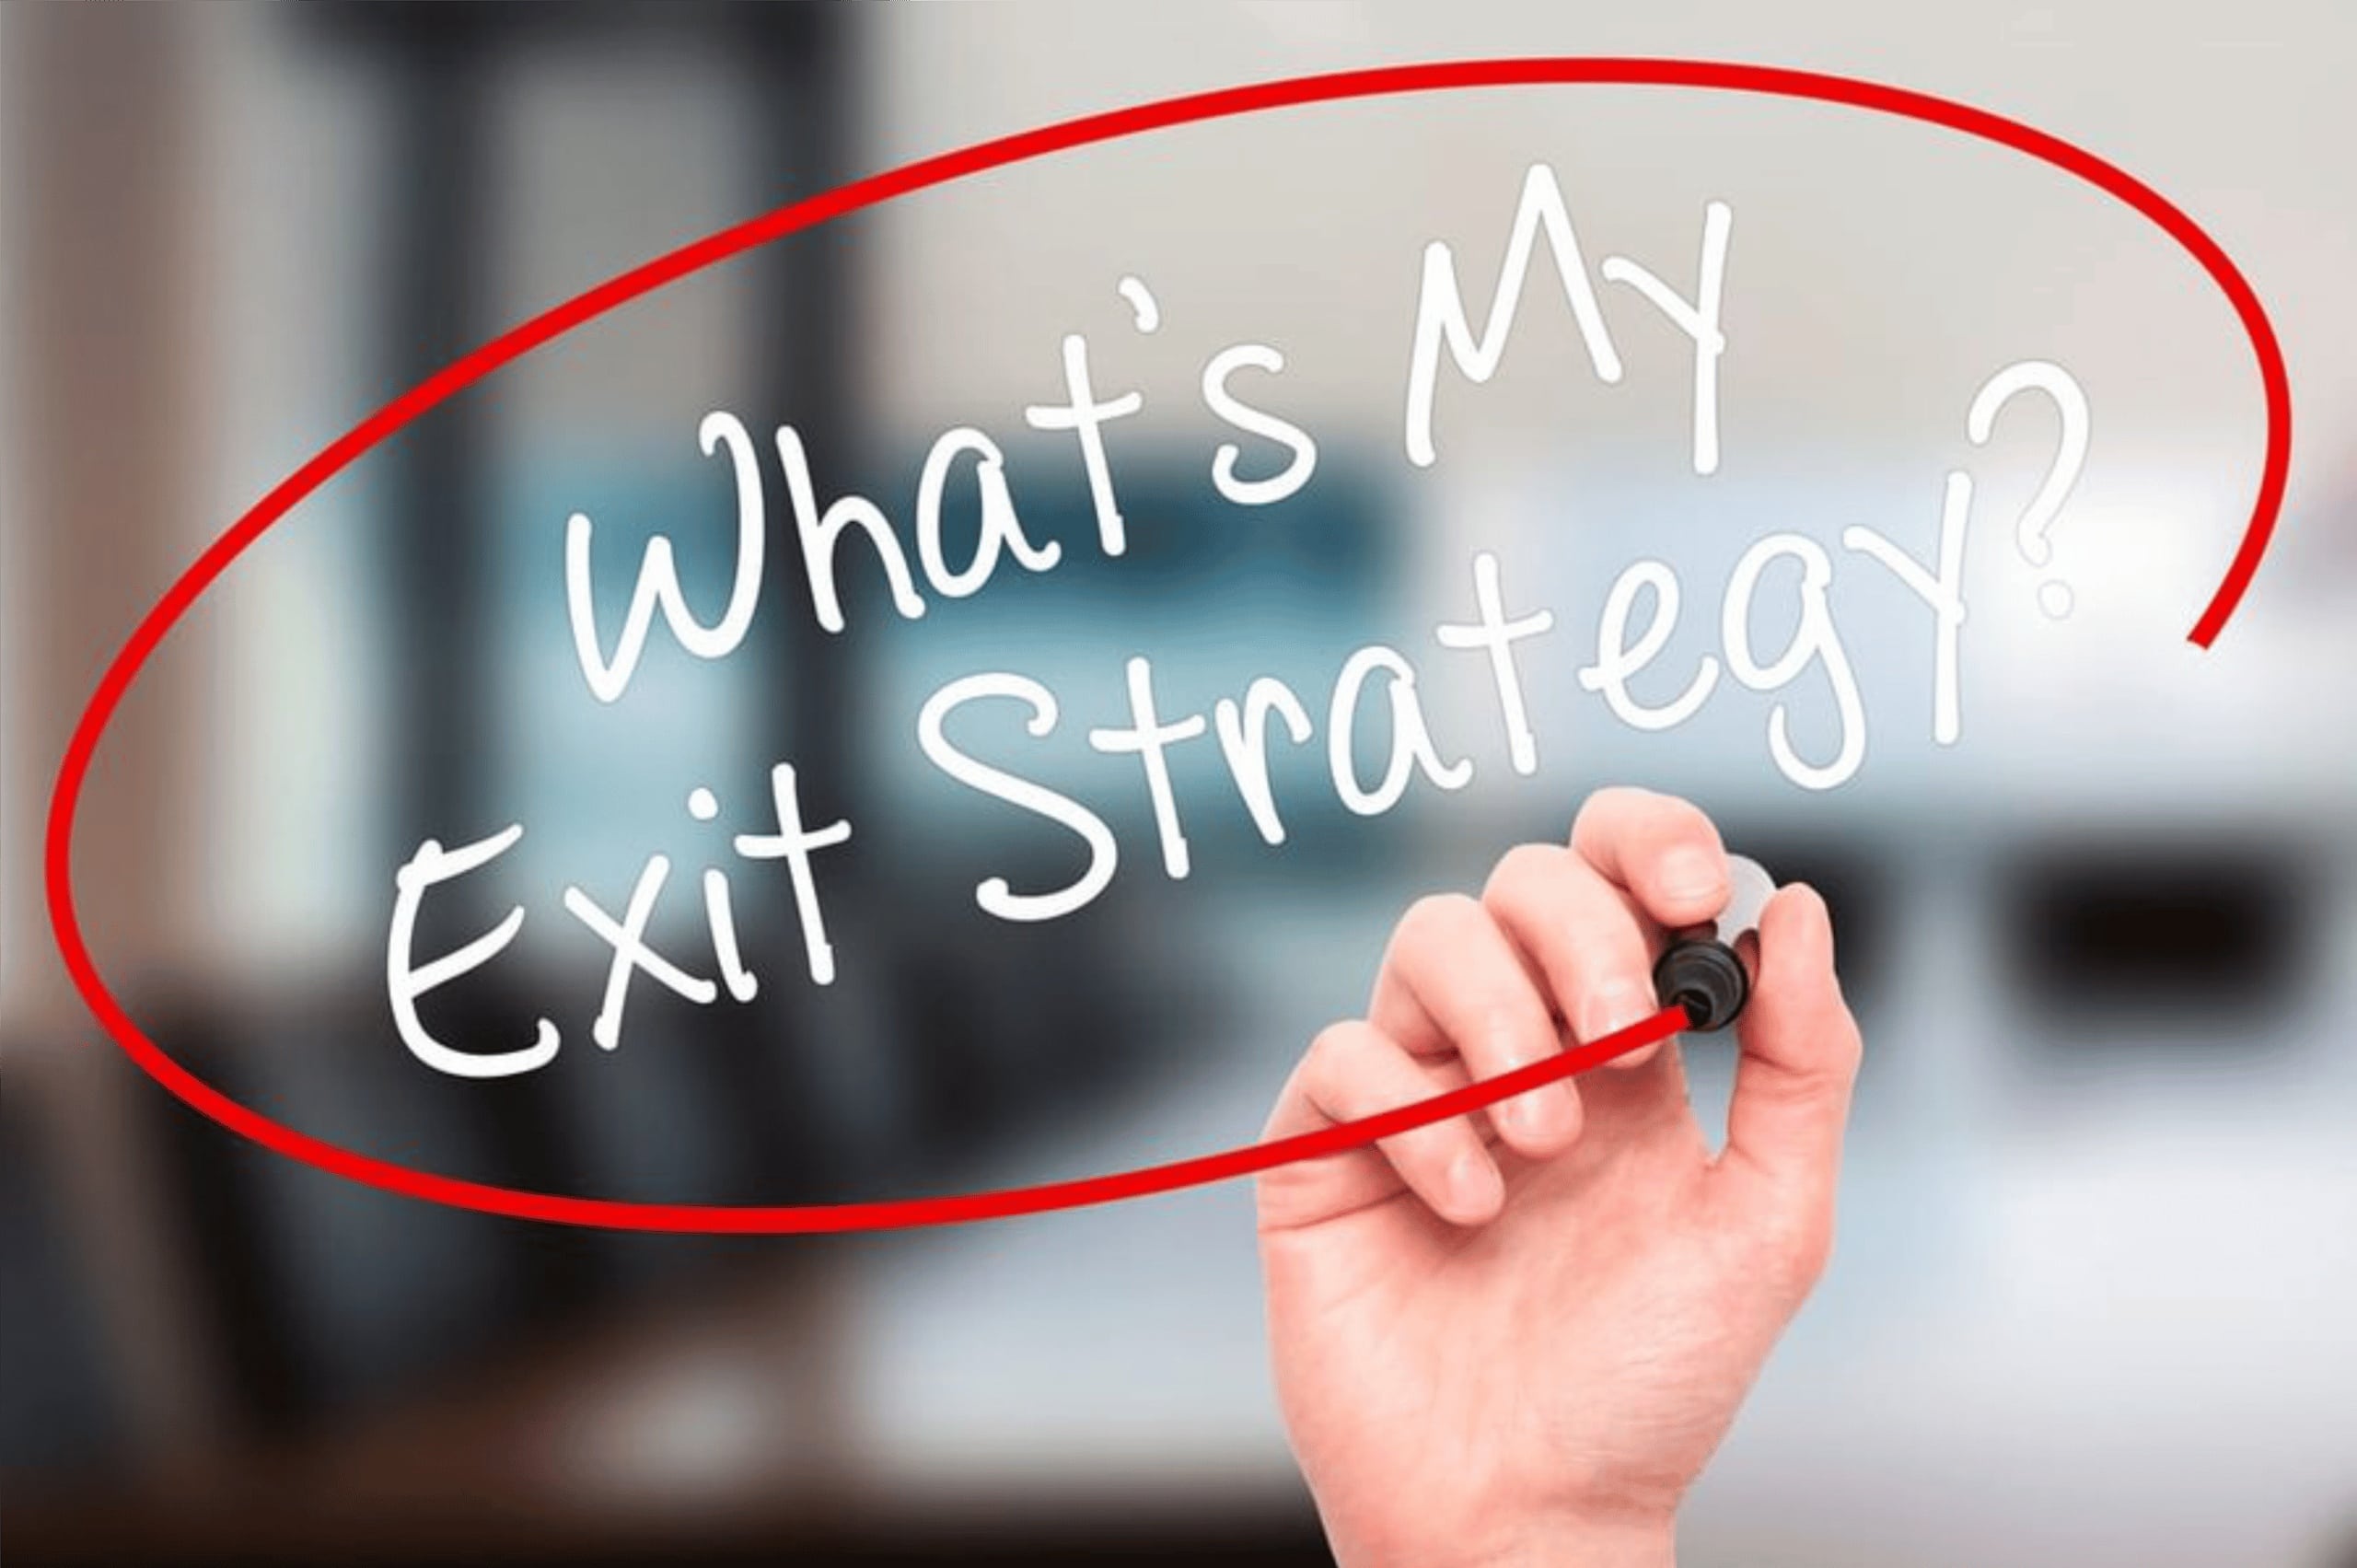 What is a good business exit strategy